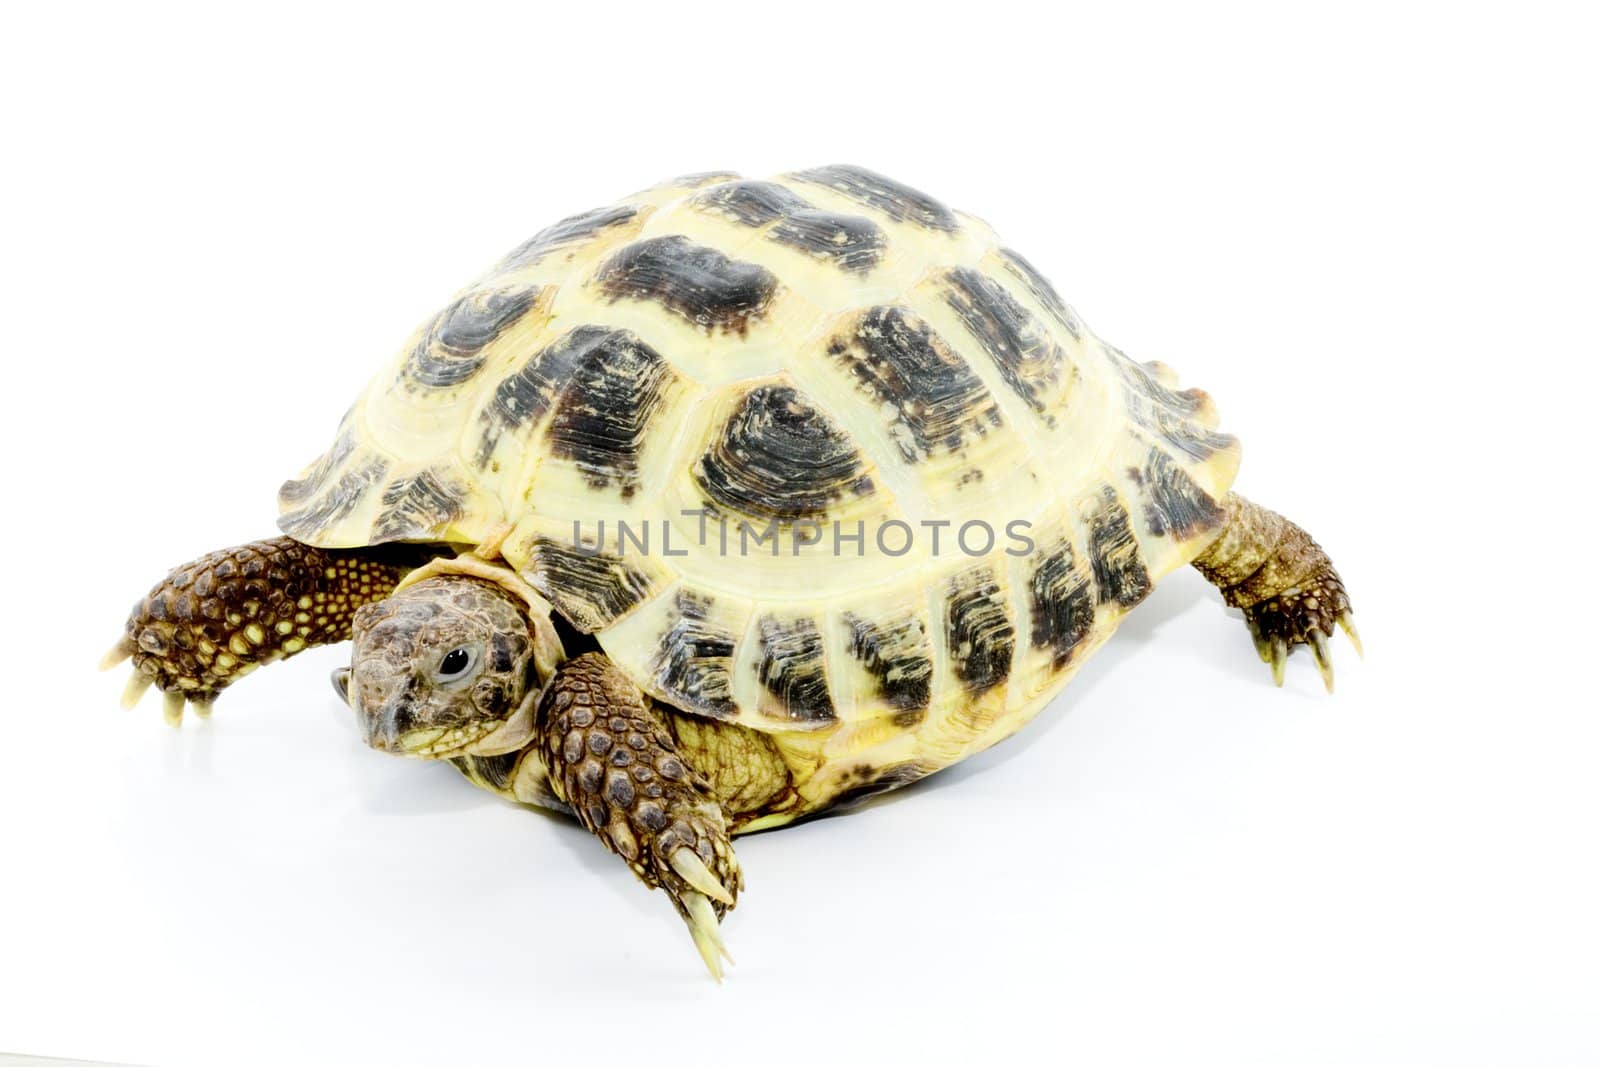 a young tortoise - Testudo horsfieldi - on the white background - close up